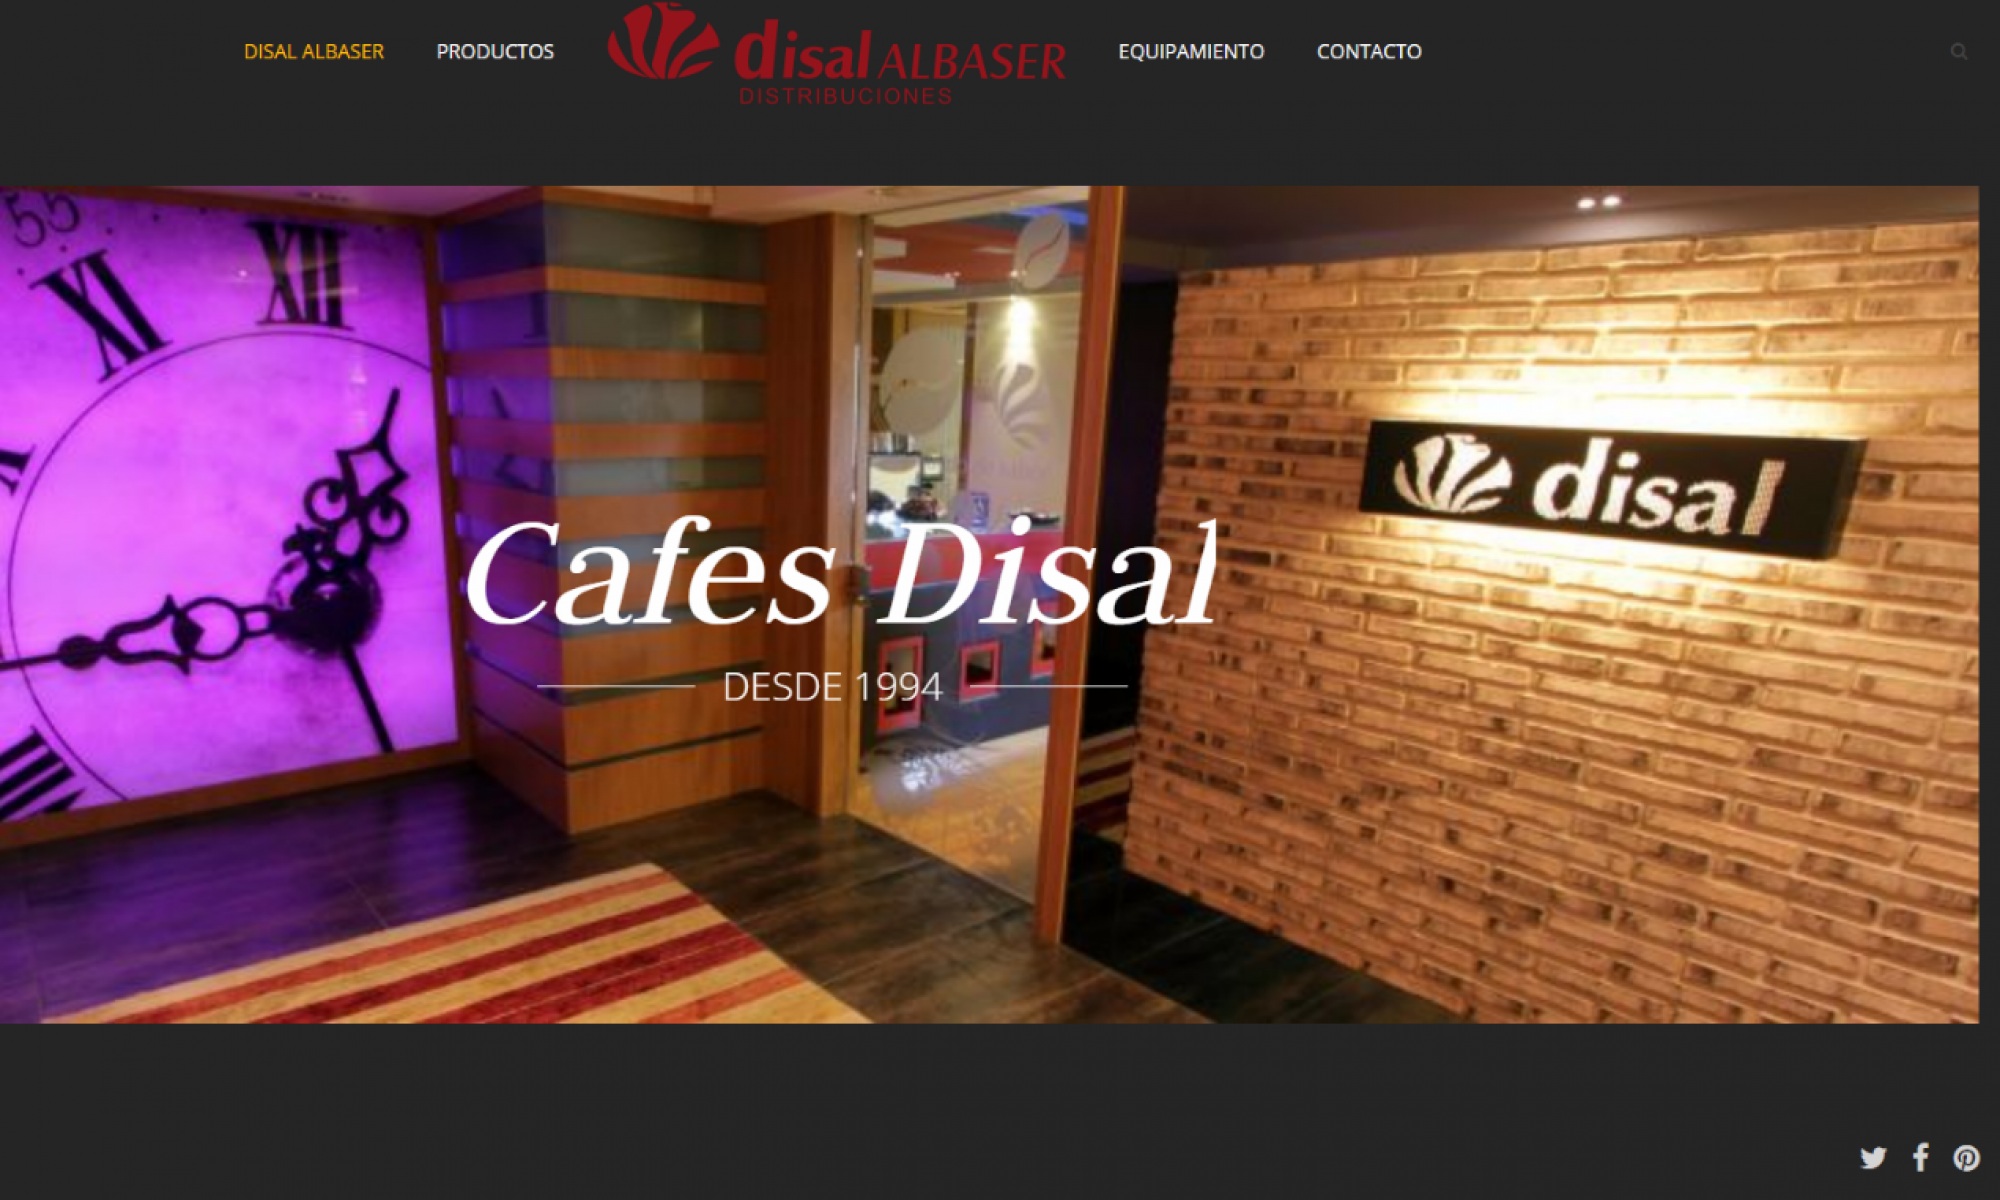 Cafes Disal